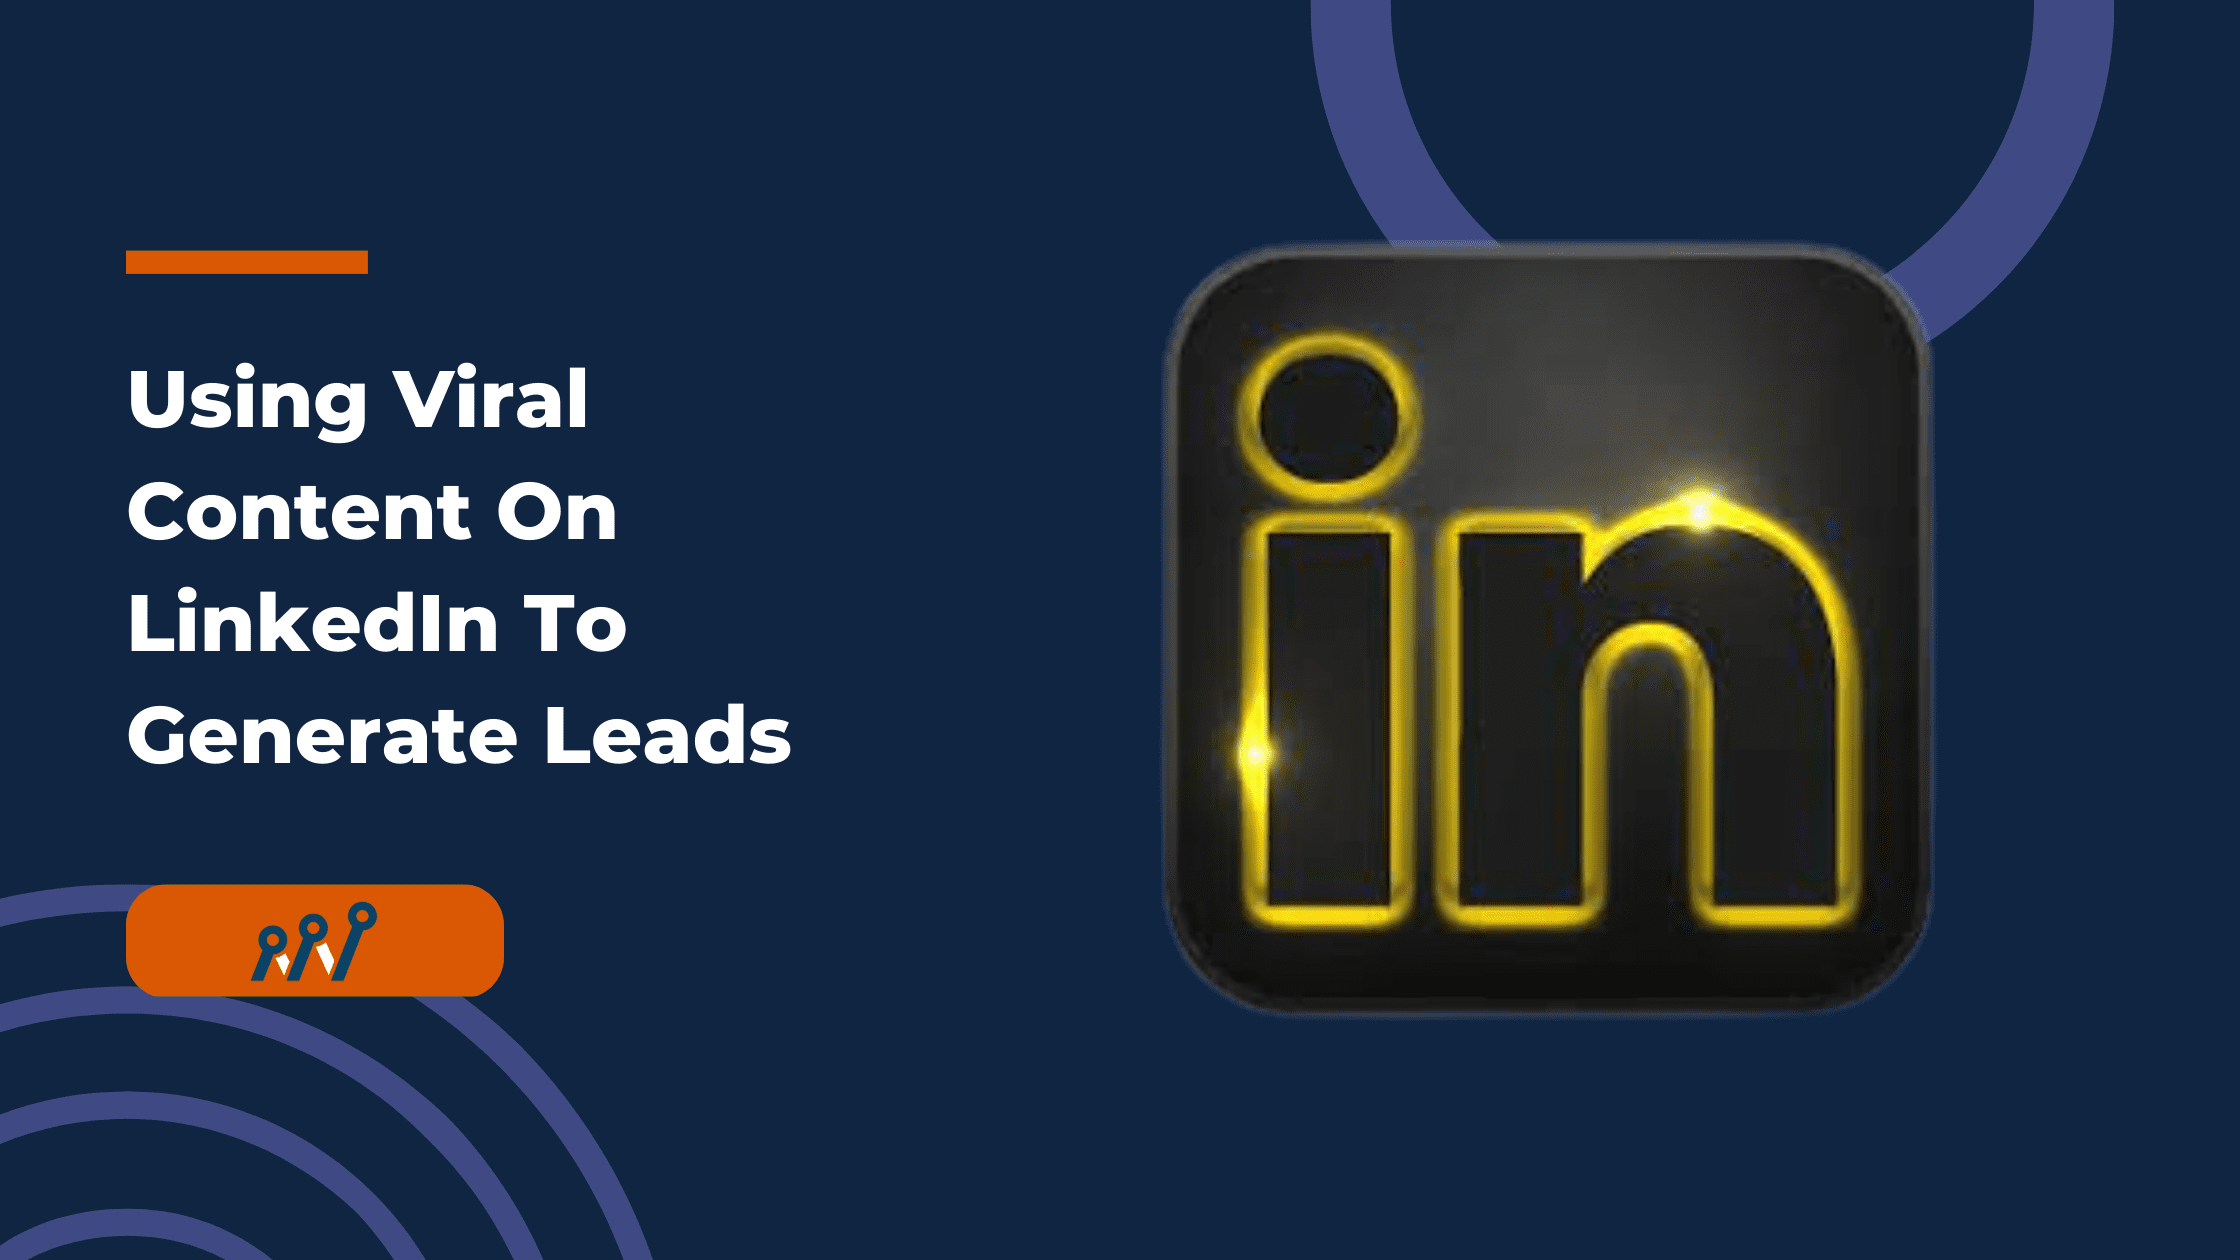 Using Viral Content On LinkedIn To Generate Leads